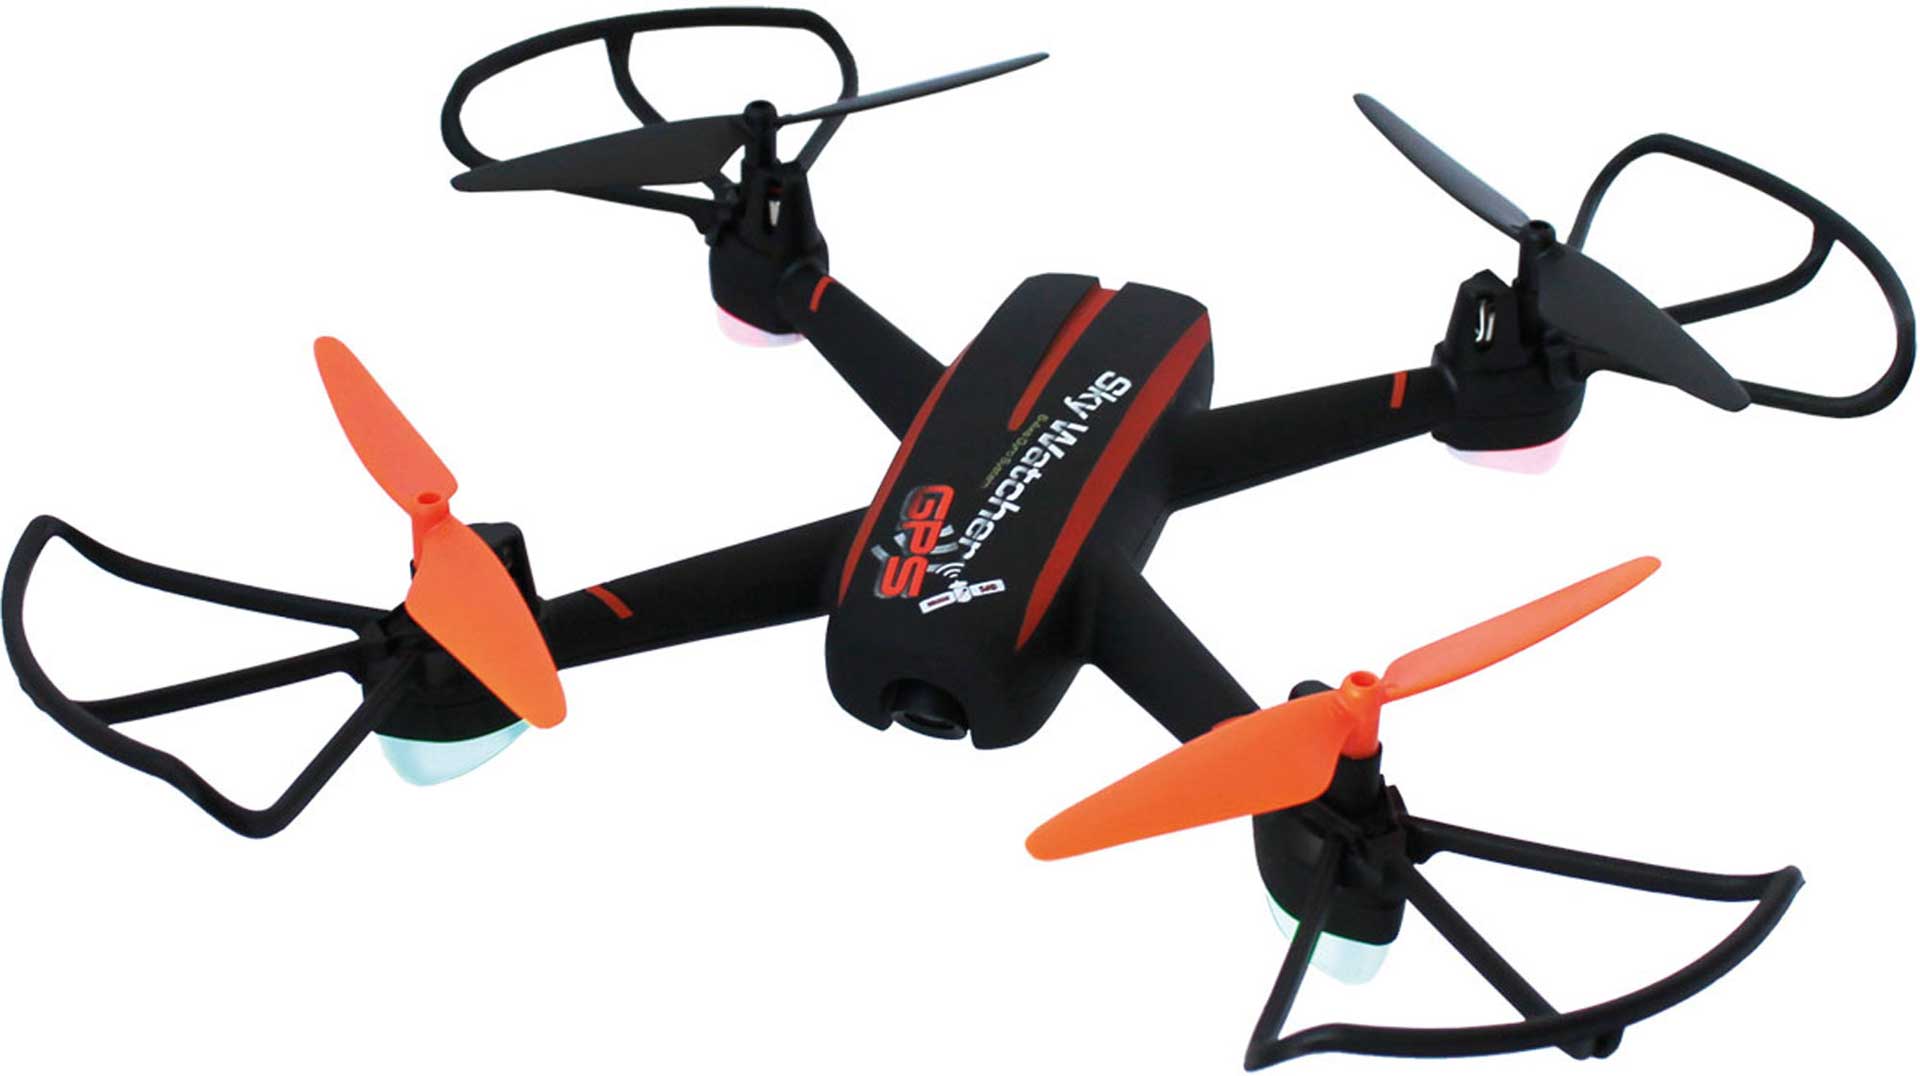 DRIVE & FLY MODELS SKY WATCHER GPS RTF + FPV COPTER 180G TAKE-OFF WEIGHT